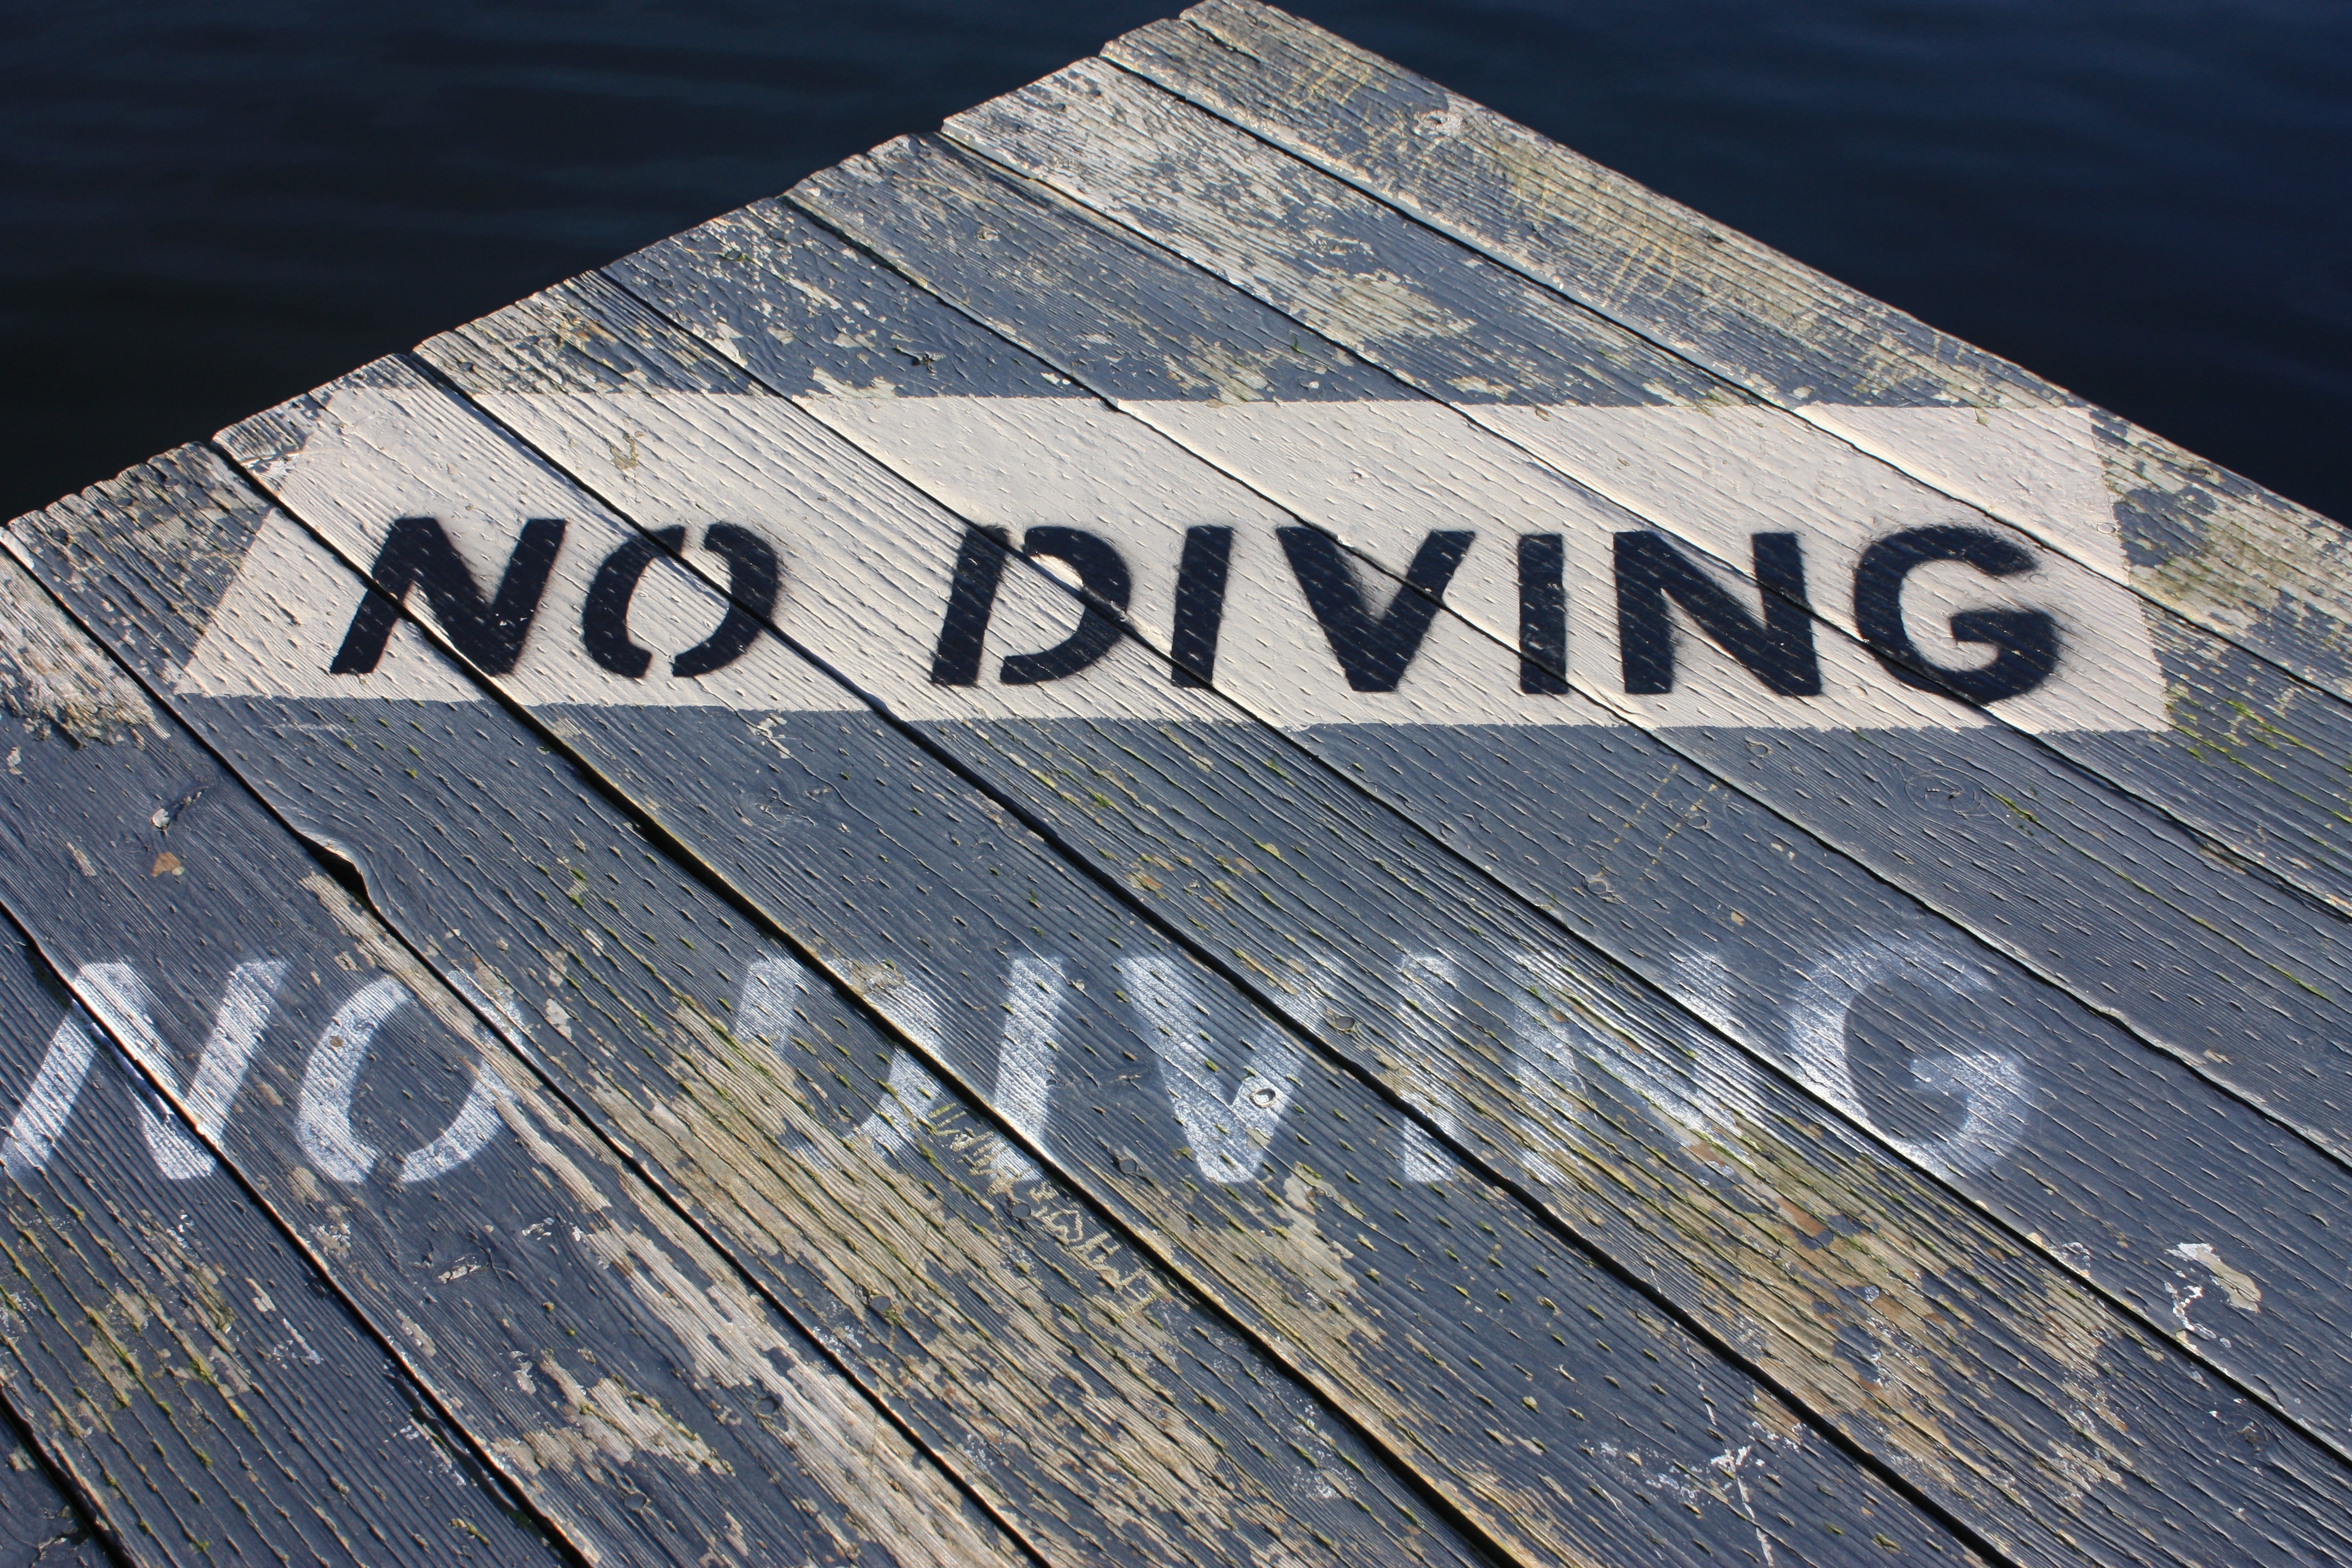 Lake, Diving, Old, Dock, Wood, text, communication